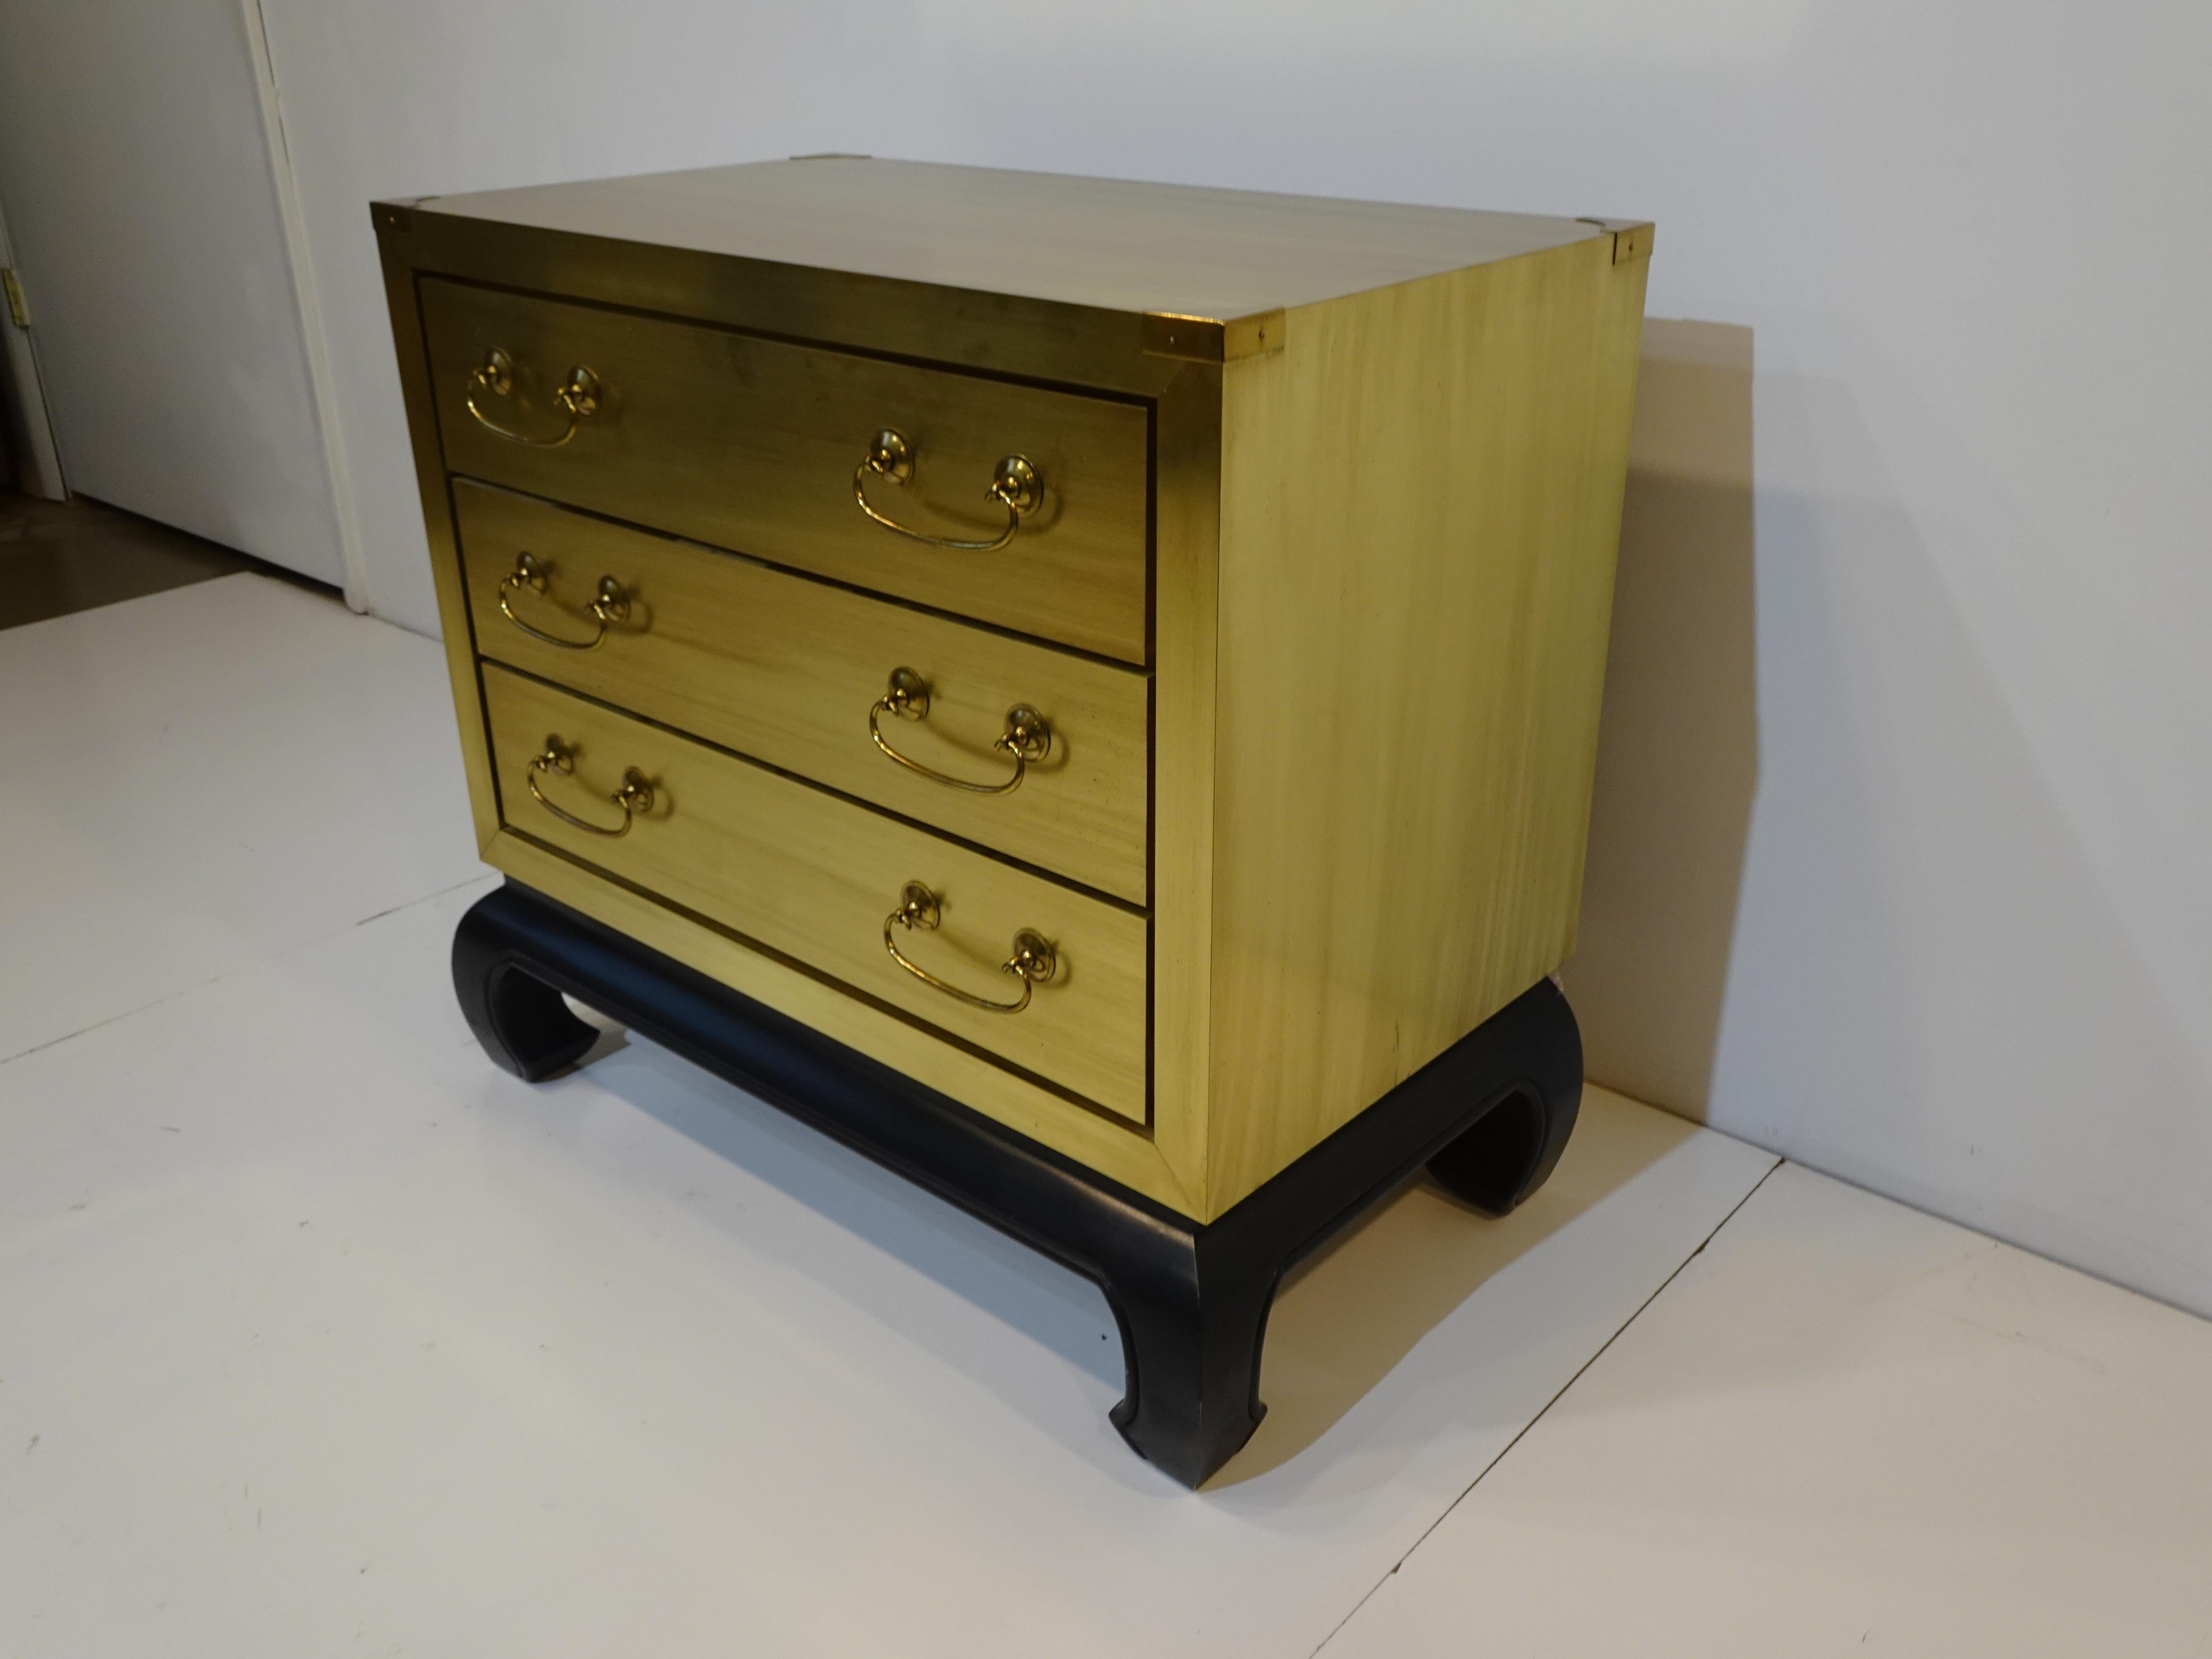 A three drawer small dresser chest with brass and wood construction having a satin black decorative base and large brass pulls. Very well crafted with wood drawers and corner details to the dresser in brass, a piece that would work in any interior,